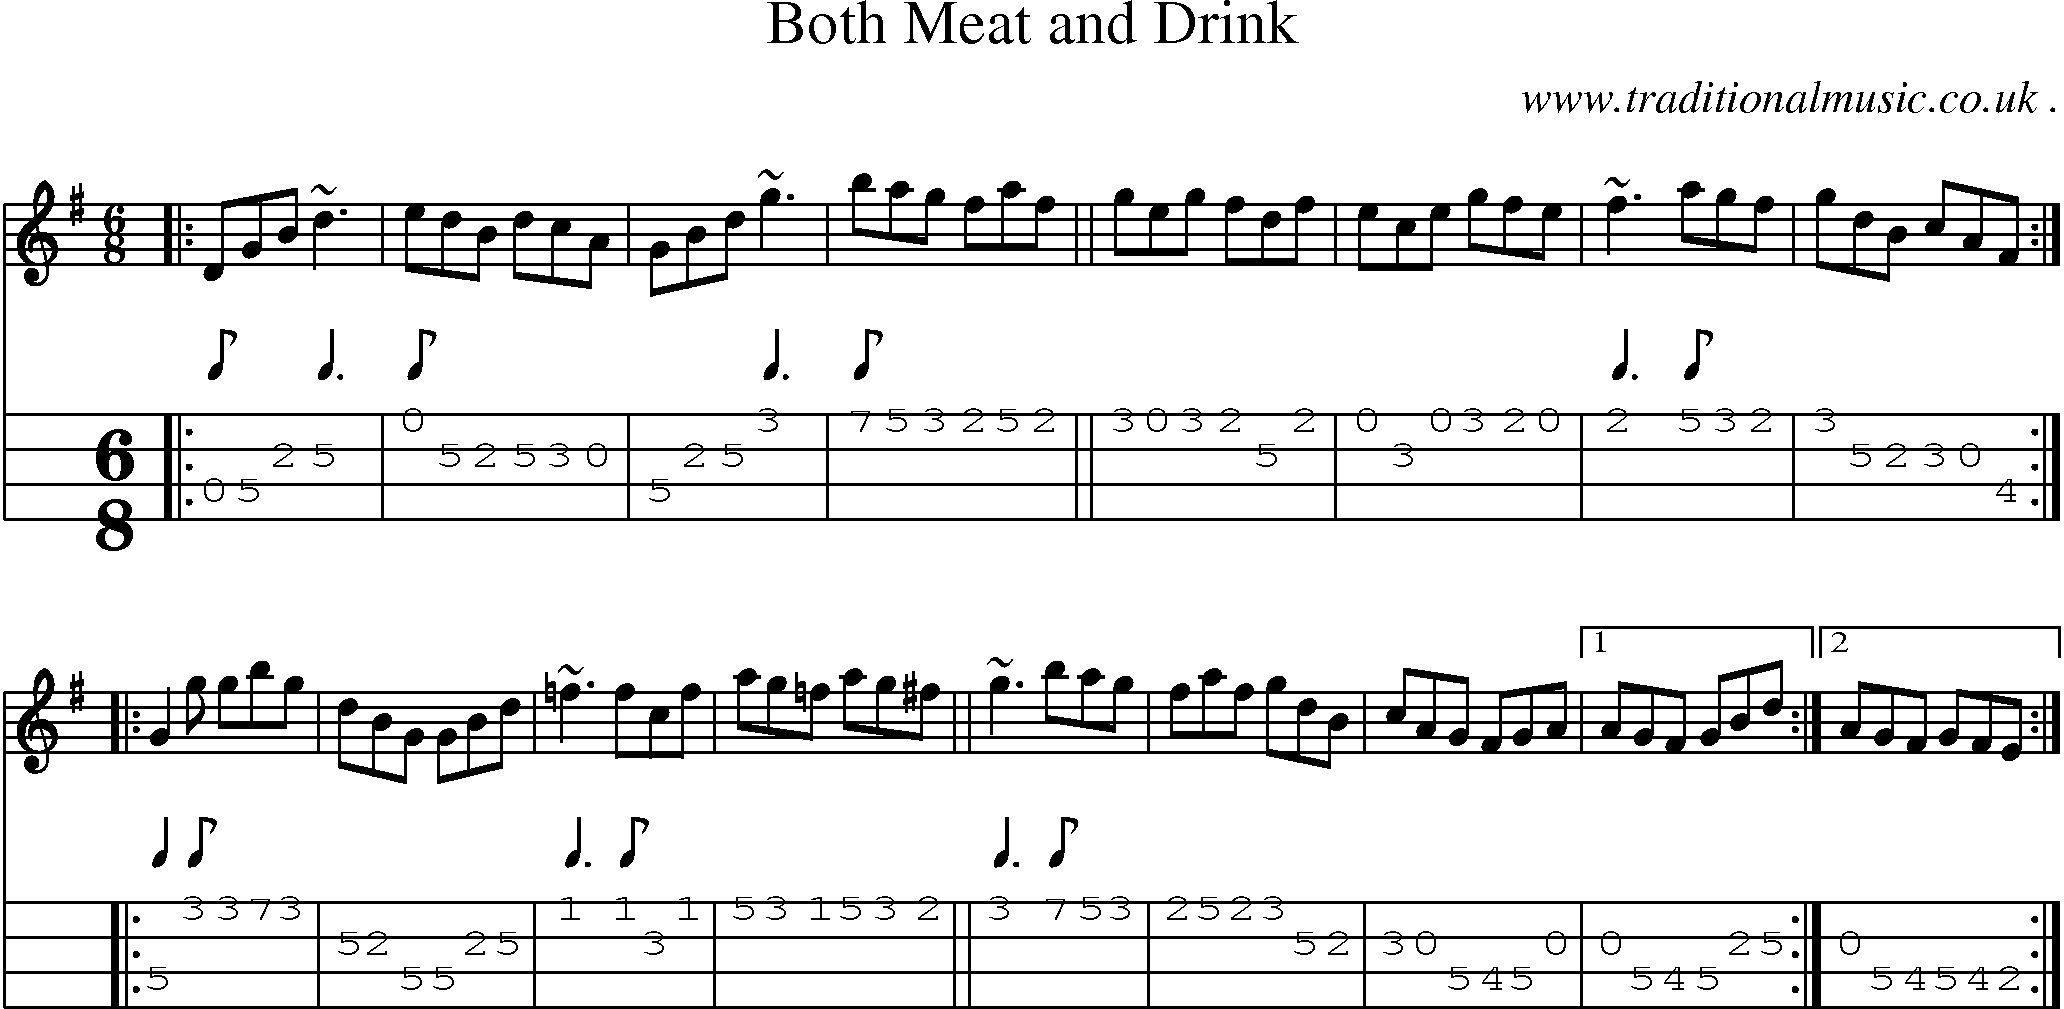 Sheet-music  score, Chords and Mandolin Tabs for Both Meat And Drink